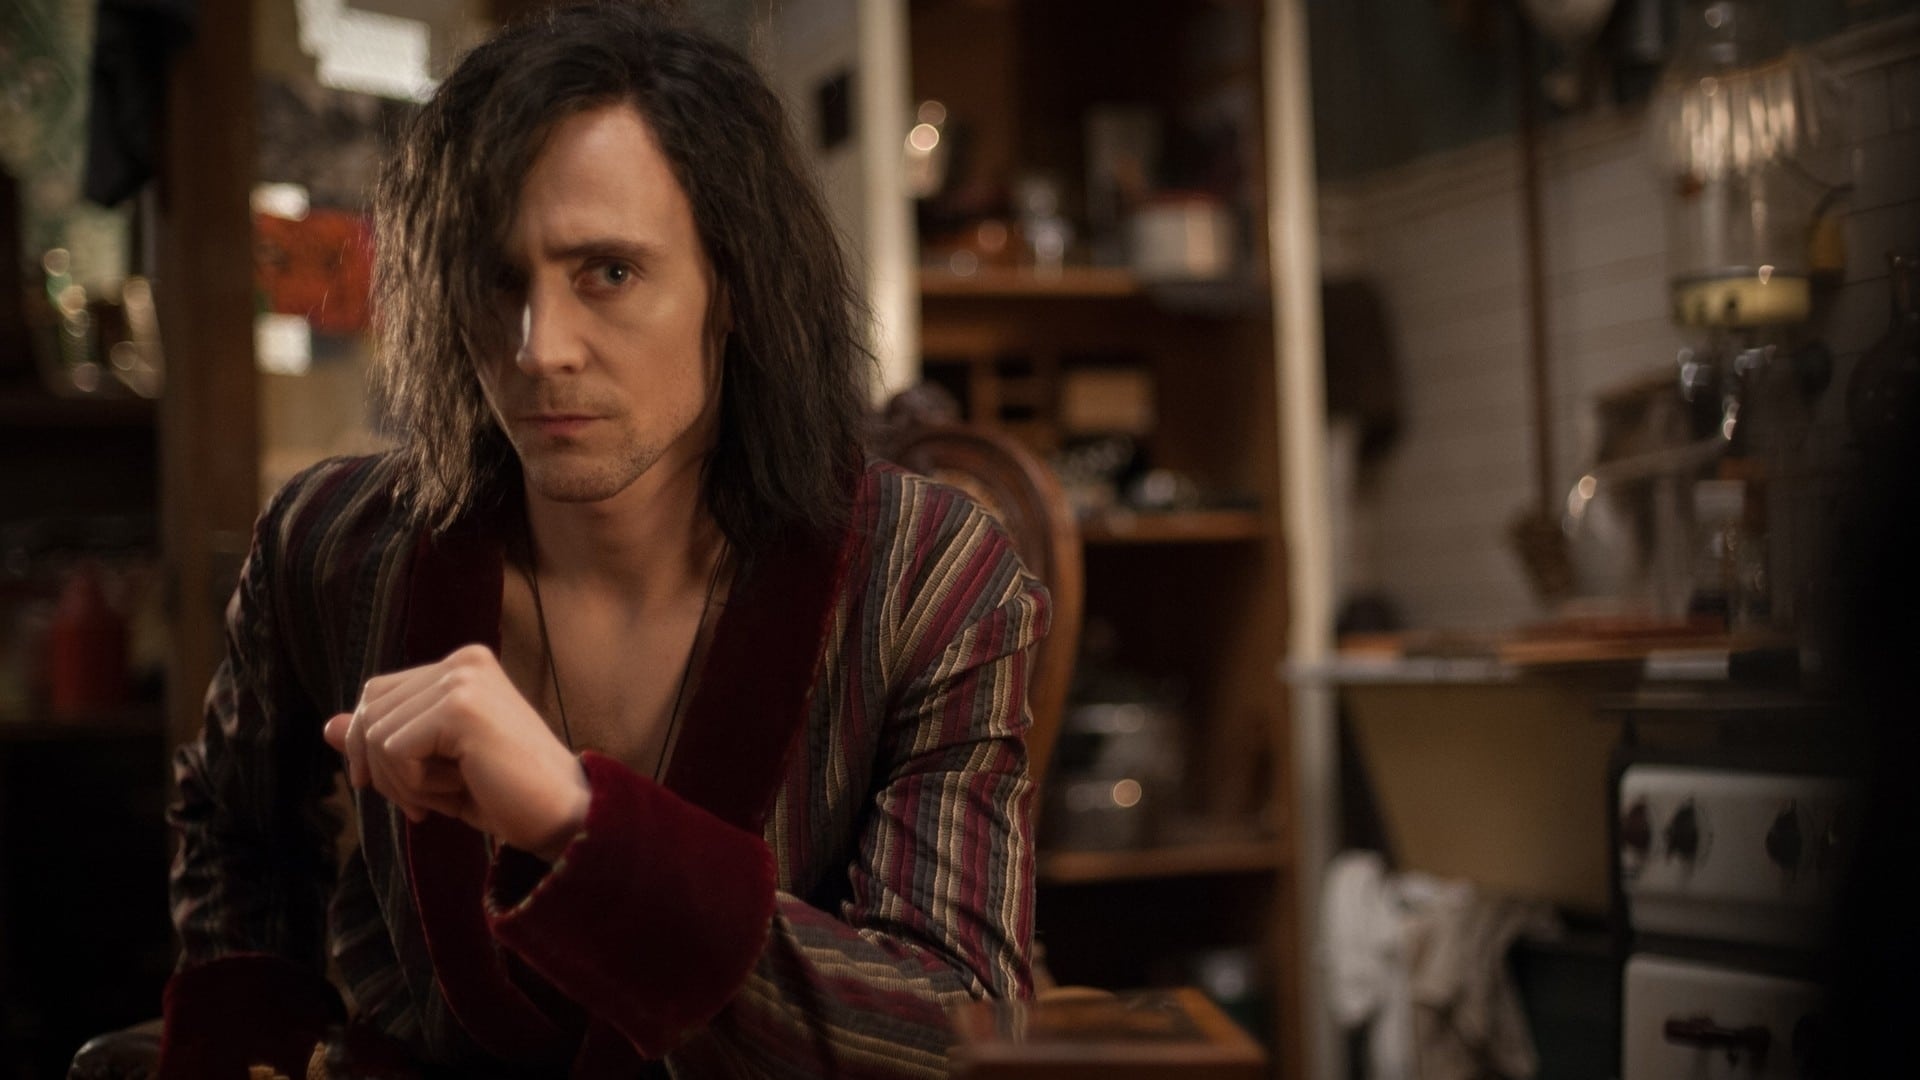 Only Lovers Left Alive movies, Backdrops movie database, Tmdb backdrops movie, Alive 2013 backdrops, 1920x1080 Full HD Desktop